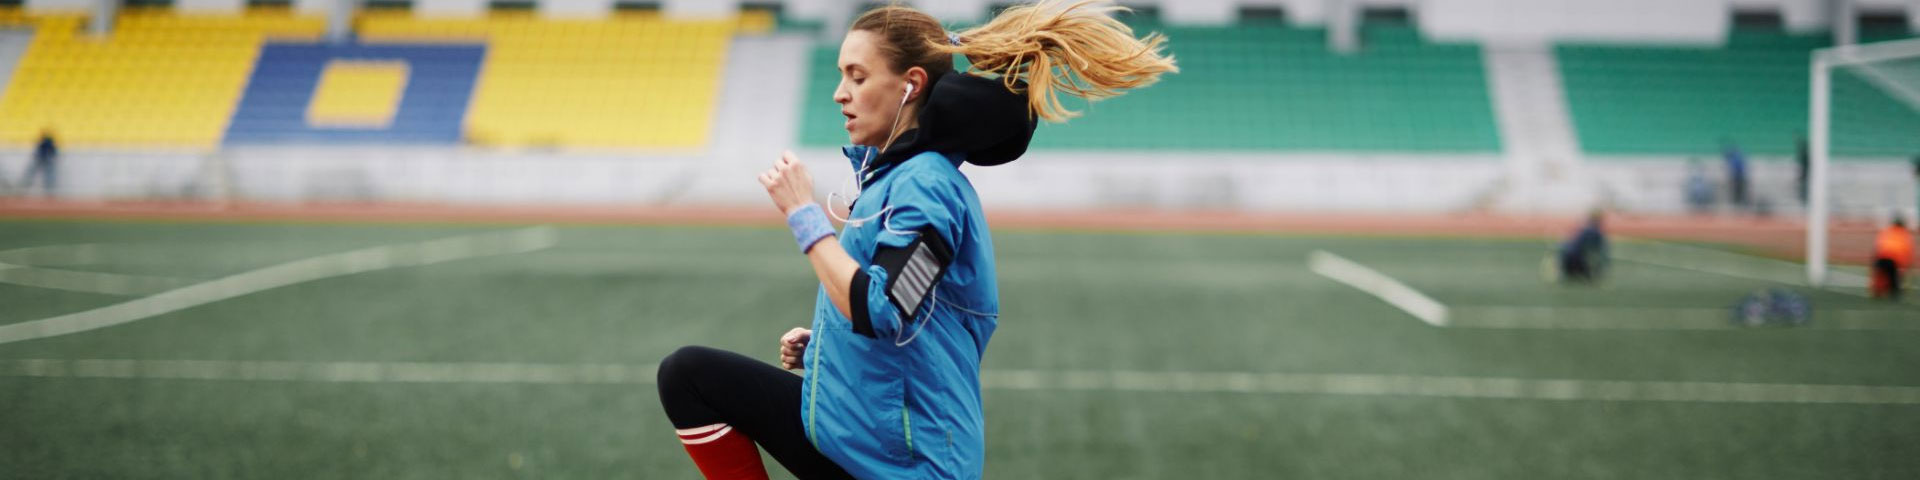  A female athlete warming up in an empty stadium